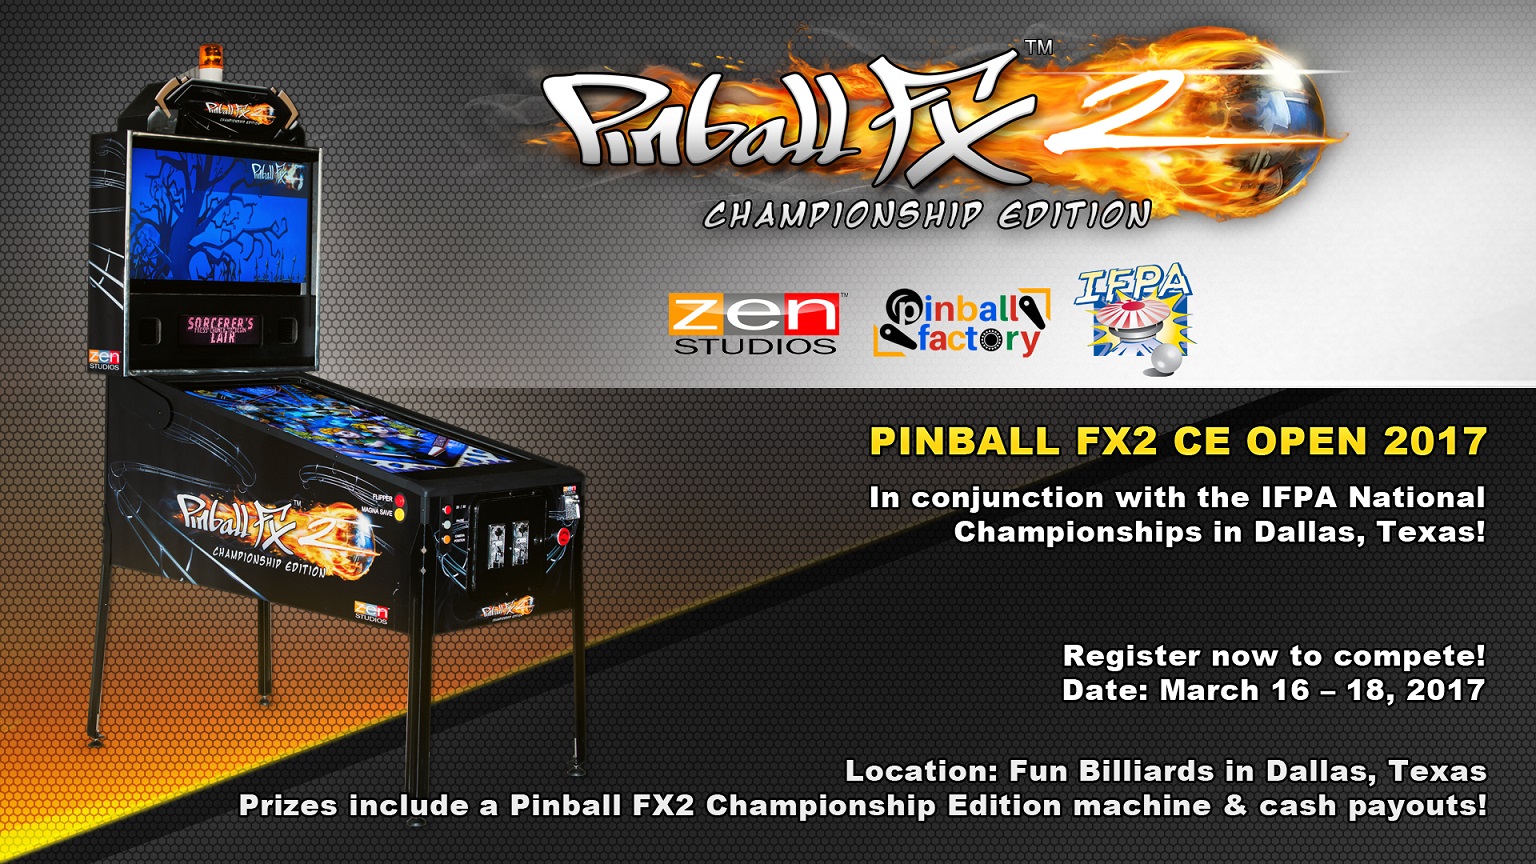 Zen Studios Pinball Factory And The Ifpa Team Up For The Ifpa